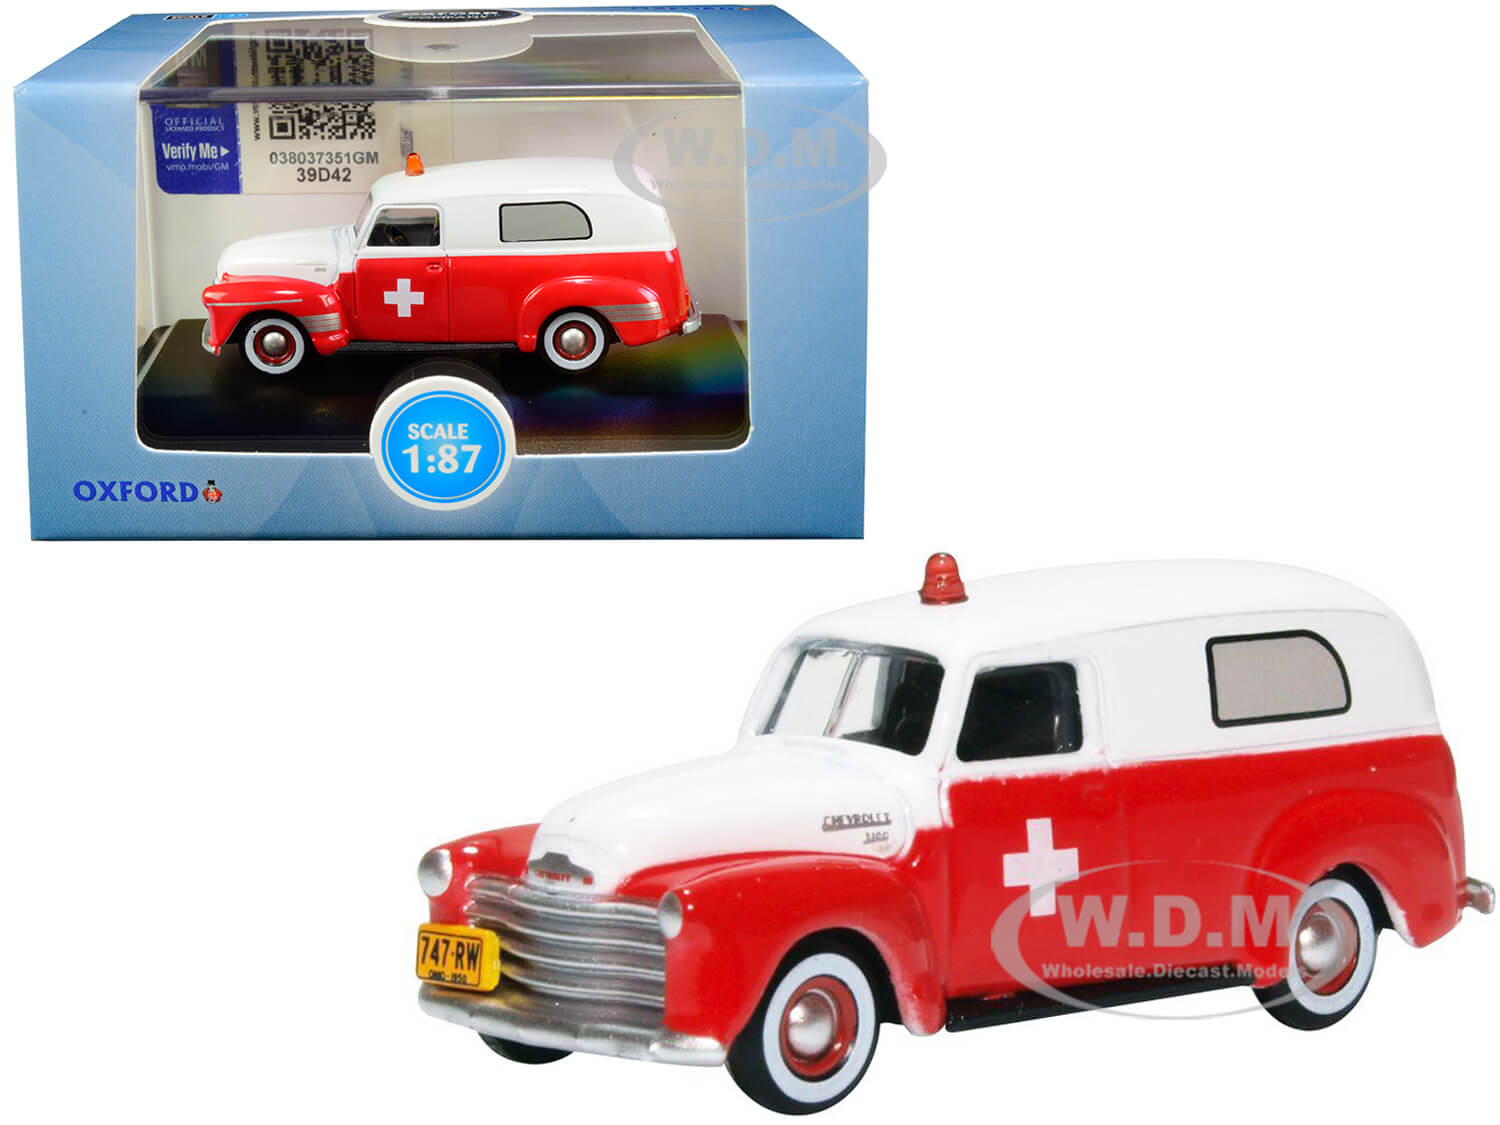 1950 Chevrolet Panel Van "Ambulance" Red and White 1/87 (HO) Scale Diecast Model Car by Oxford Diecast